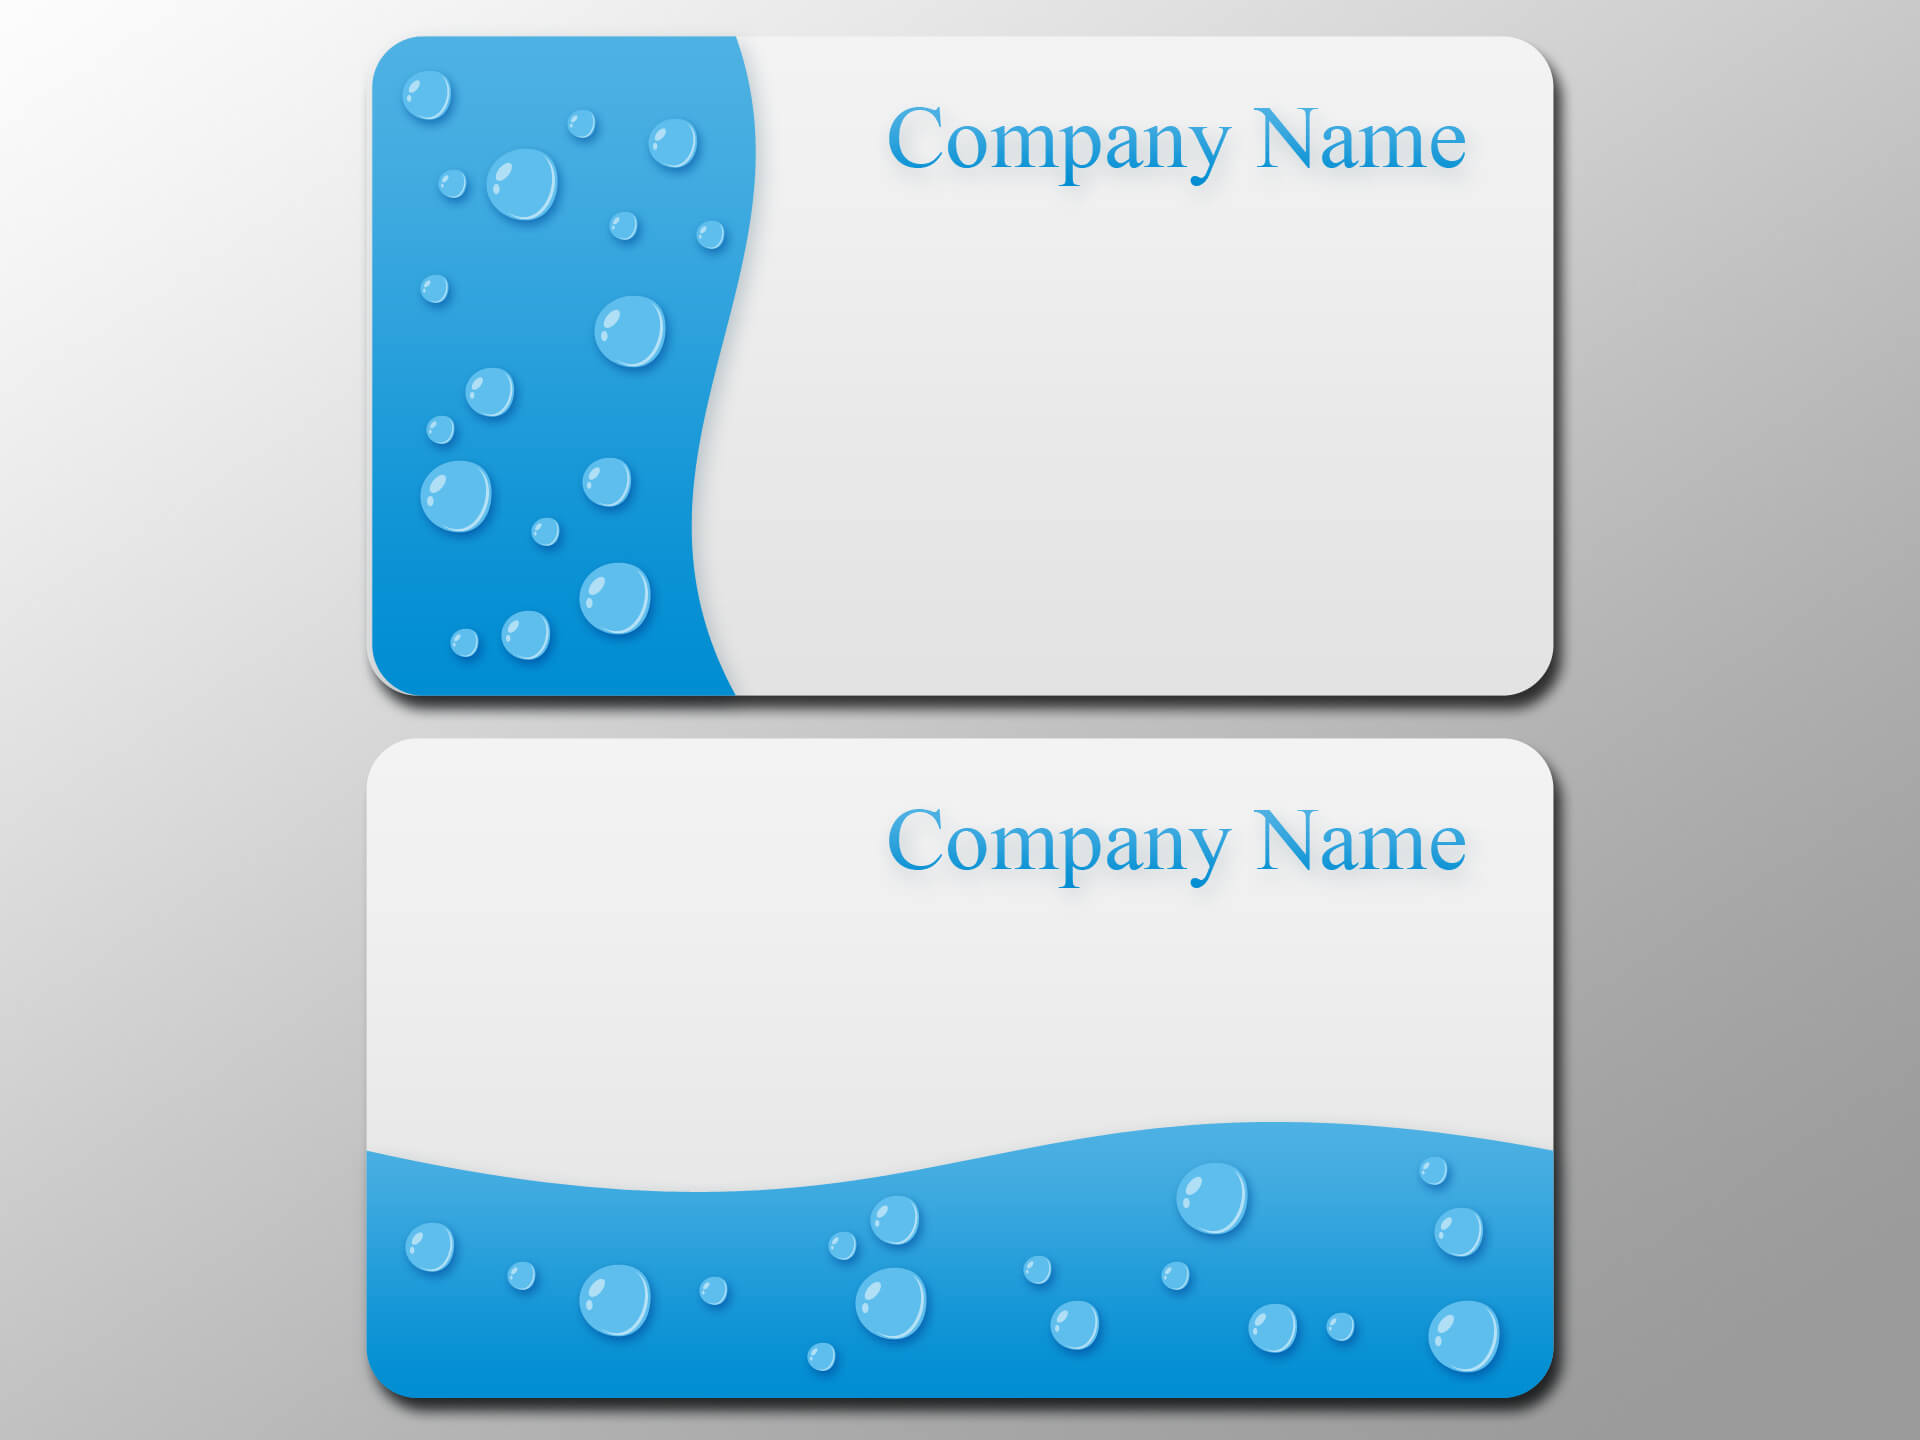 business-card-template-photoshop-blank-business-card-intended-for